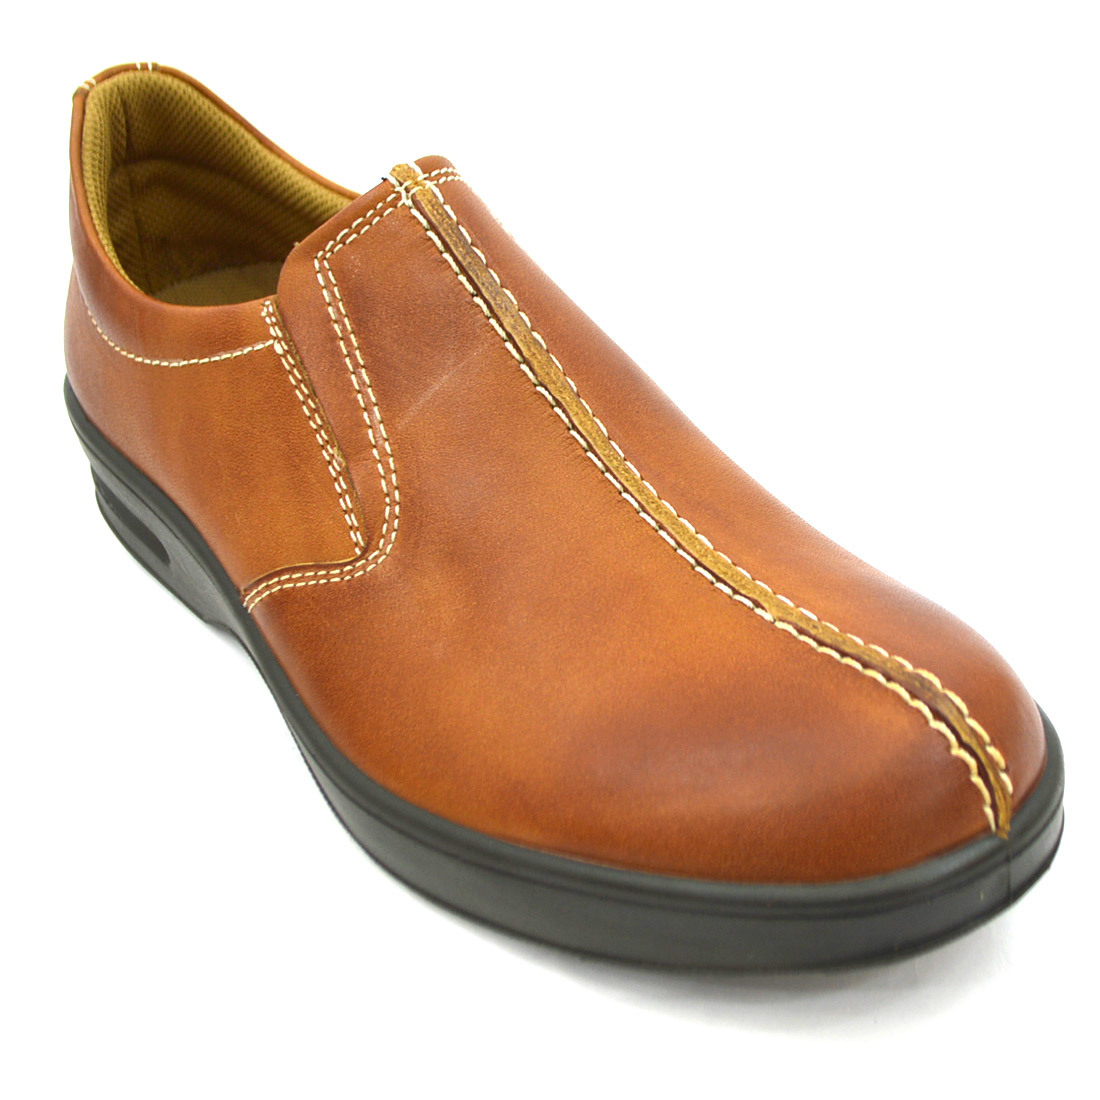 ^BOBSON Bobson casual shoes walking slip-on shoes 4509 original leather made in Japan Brown Brown tea 25.5cm (0910010564-br-s255)